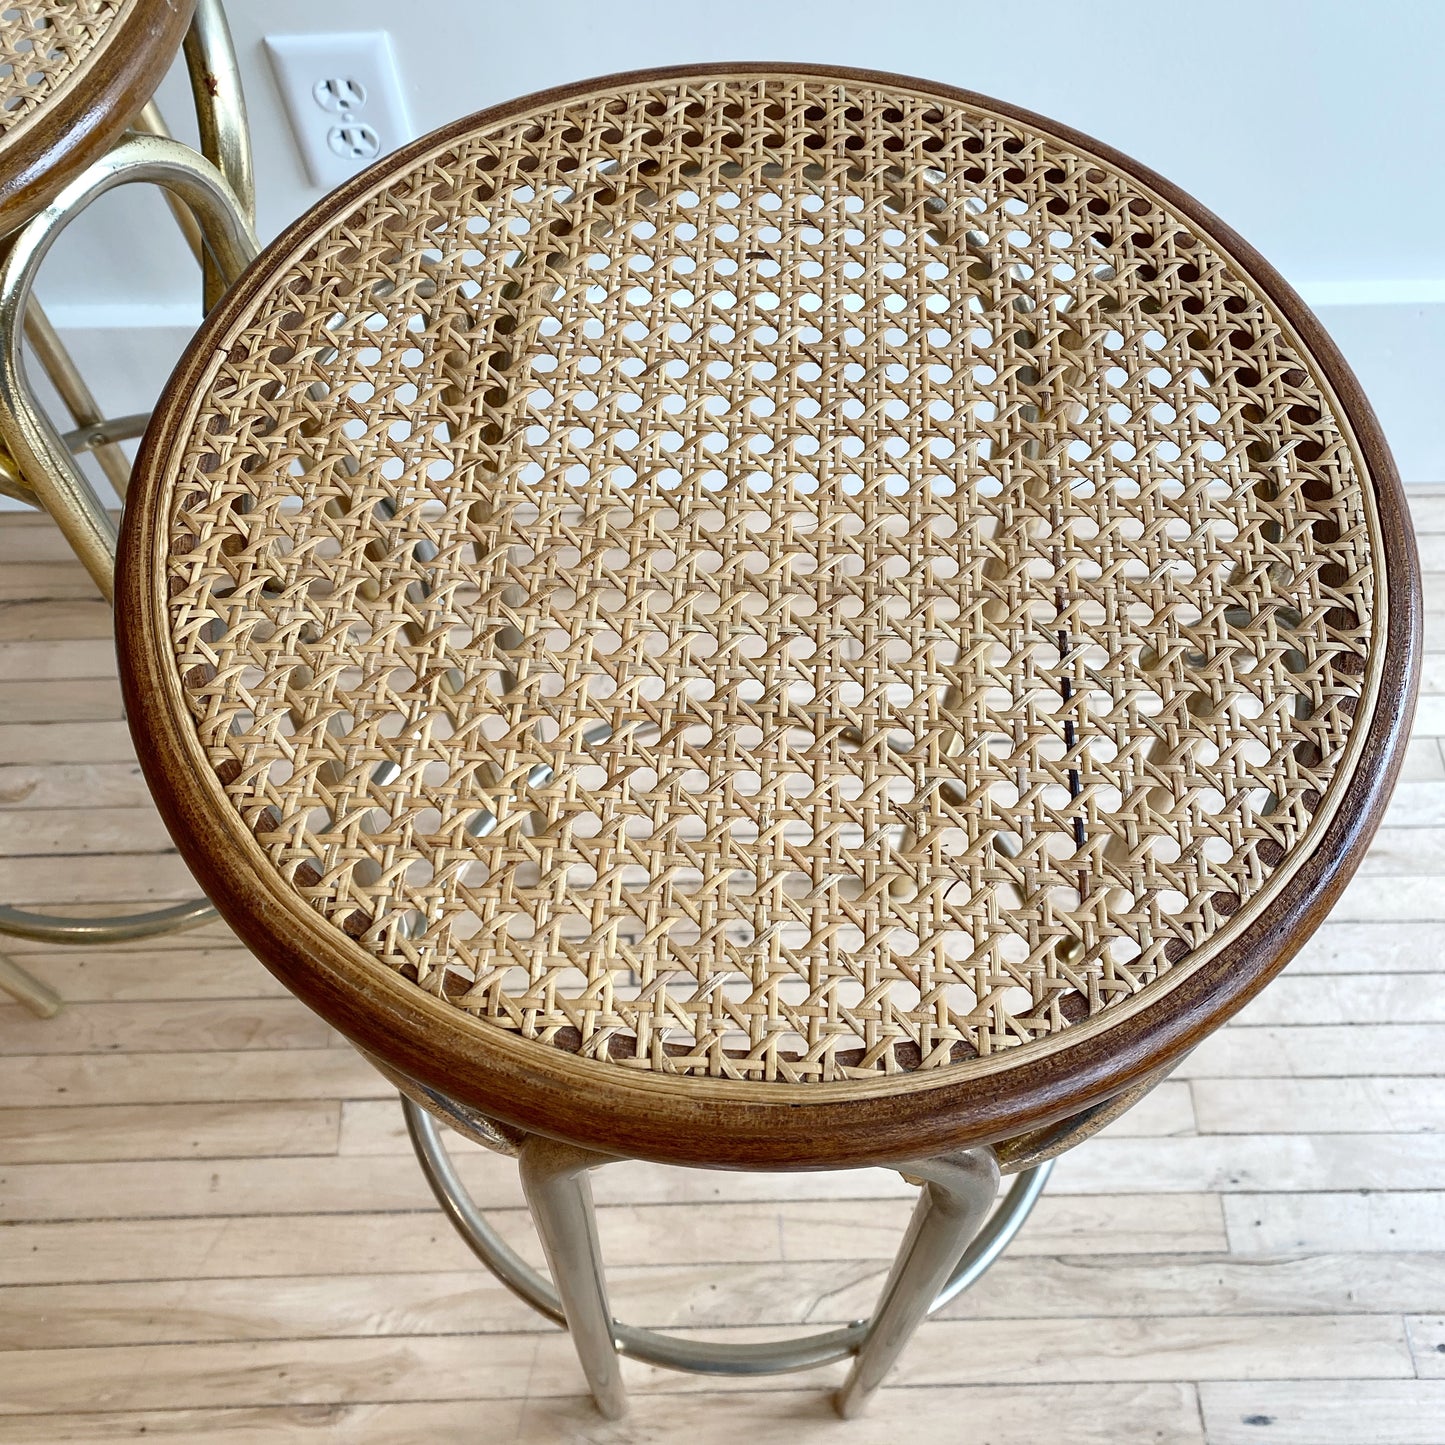 Pair of Vintage Thonet-style Counter Stools